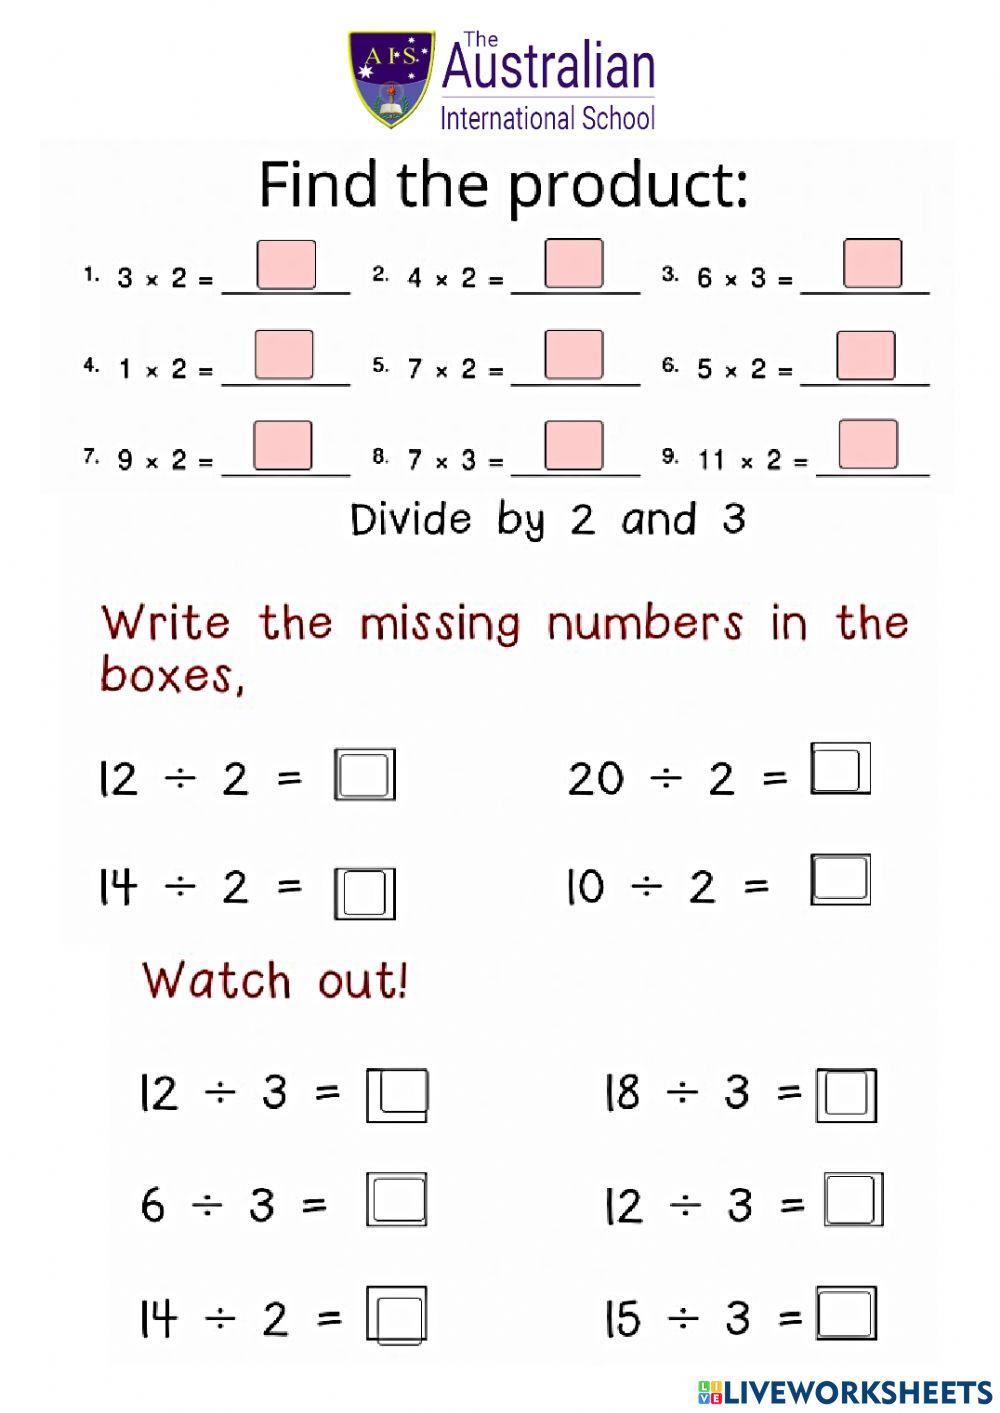 Multpying and Dividing by 2 and 3